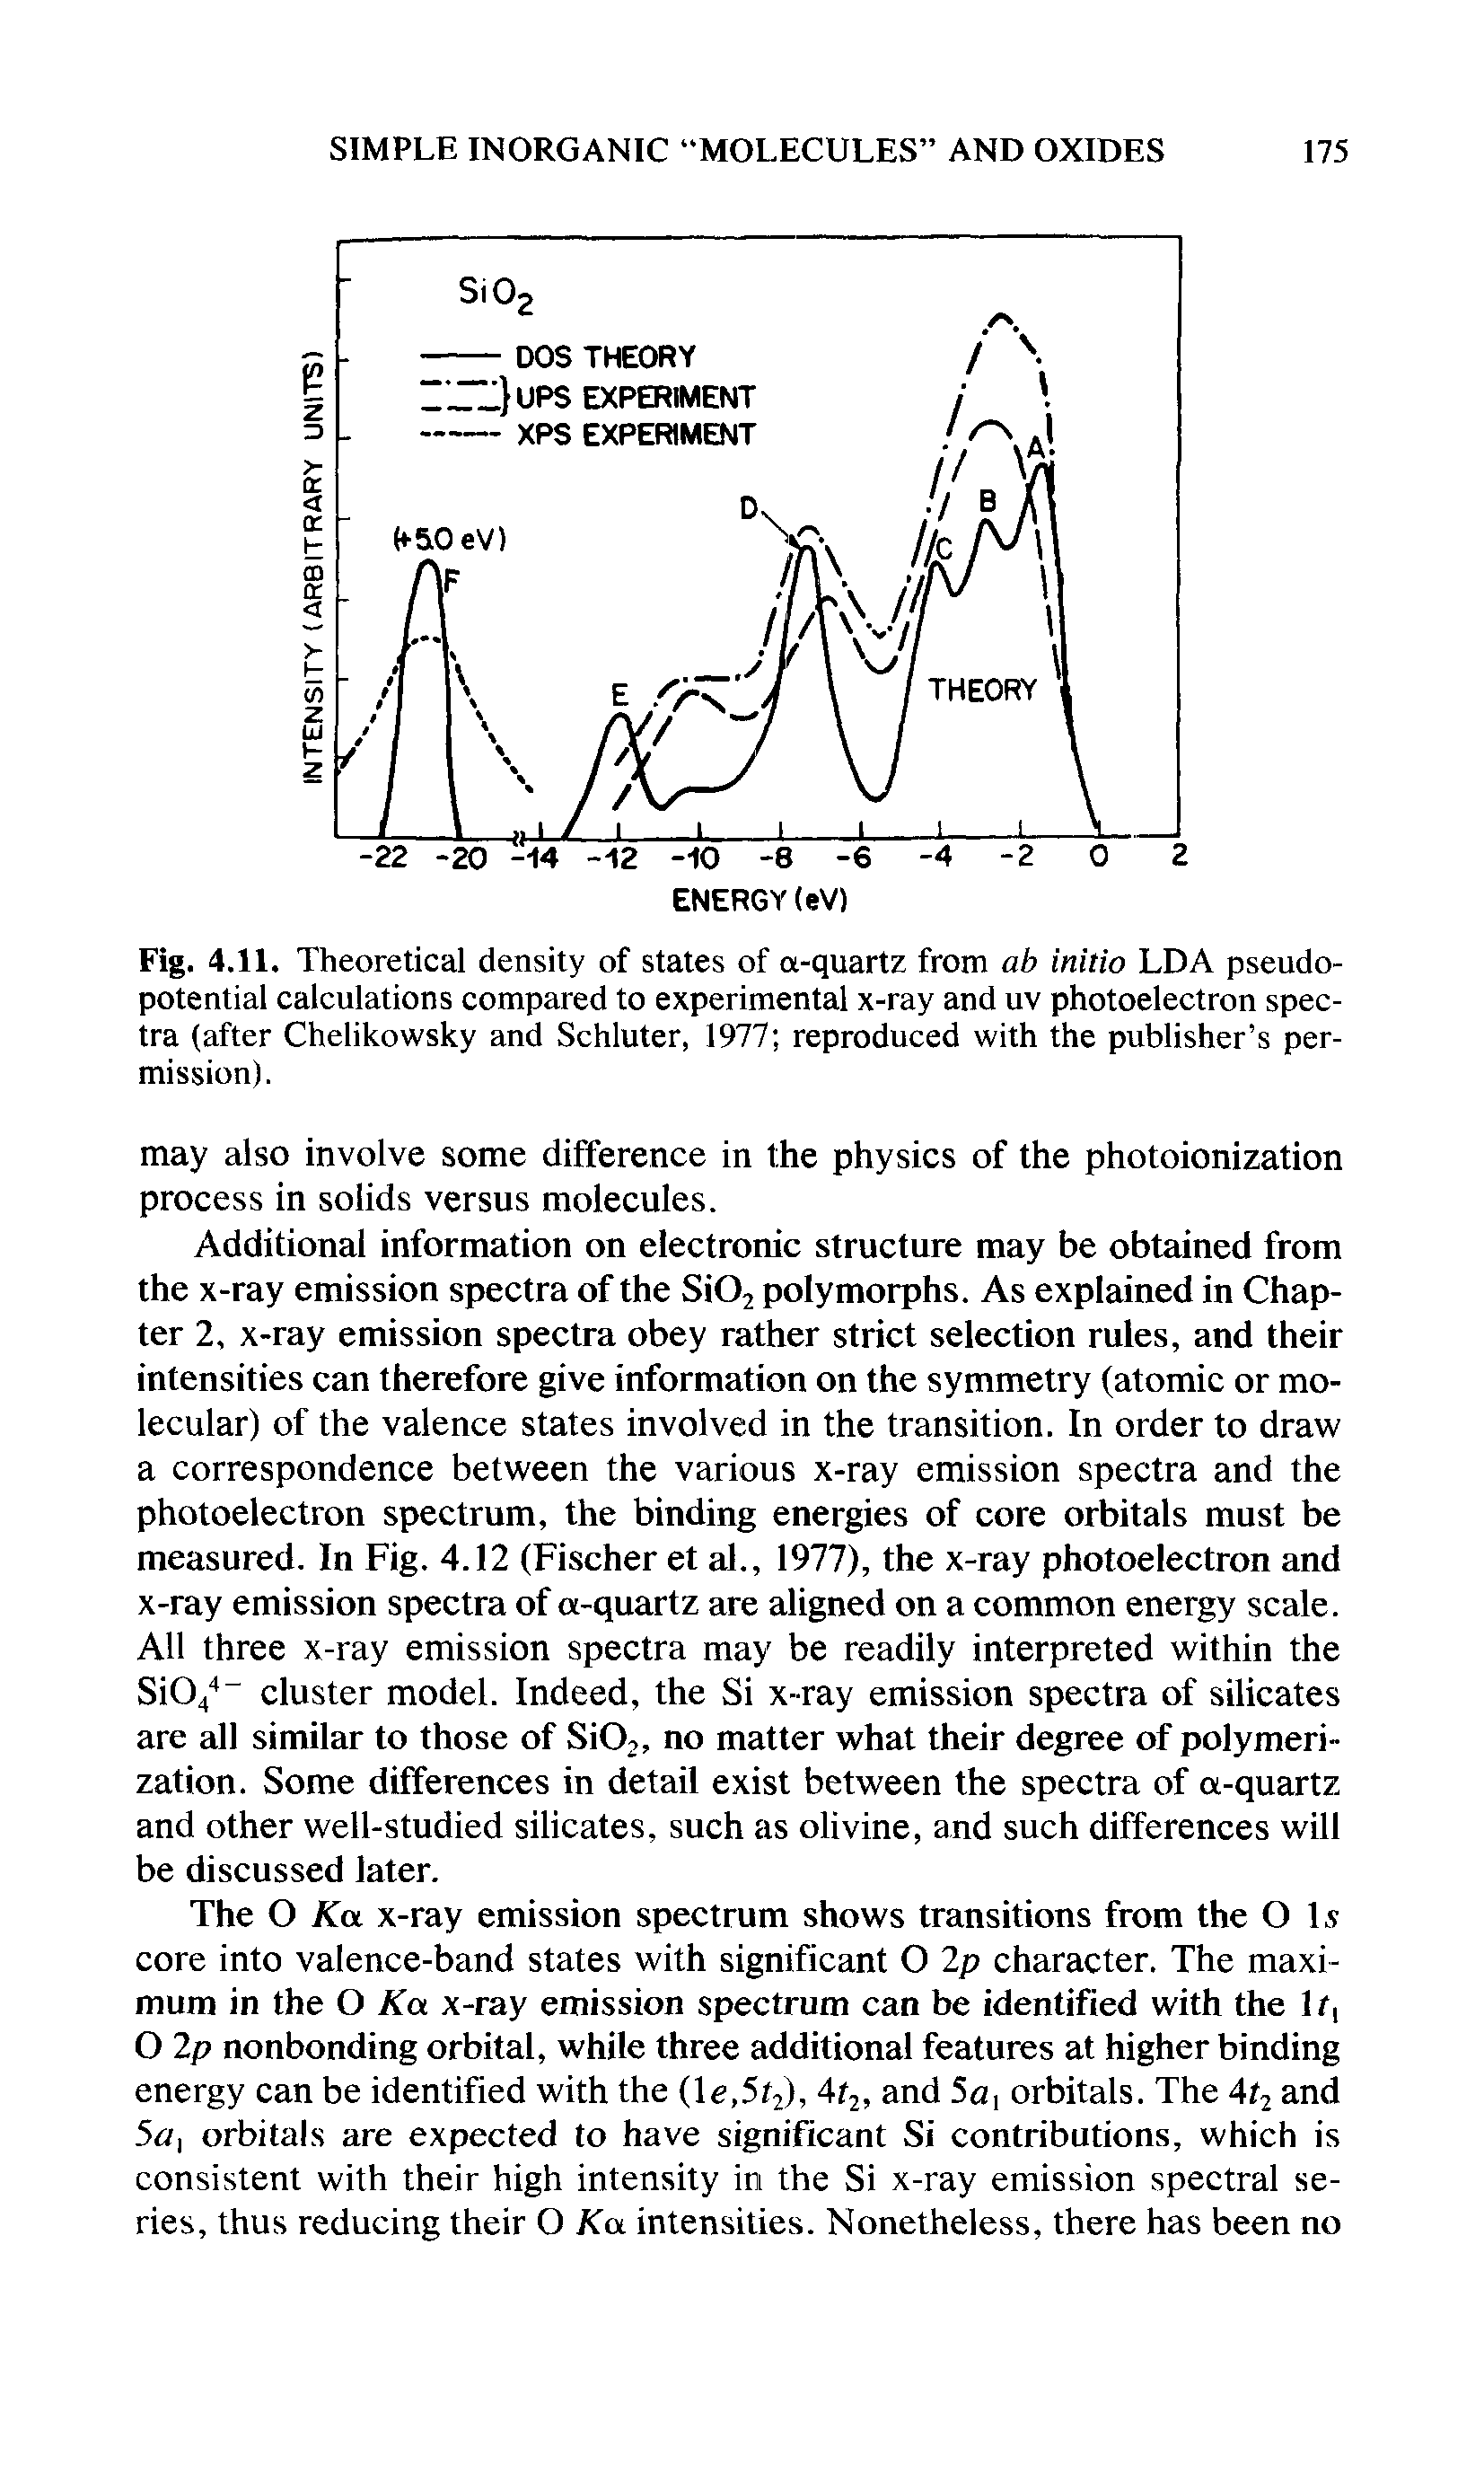 Fig. 4.11. Theoretical density of states of a-quartz from ab initio LDA pseudopotential calculations compared to experimental x-ray and uv photoelectron spectra (after Chelikowsky and Schluter, 1977 reproduced with the publisher s permission).